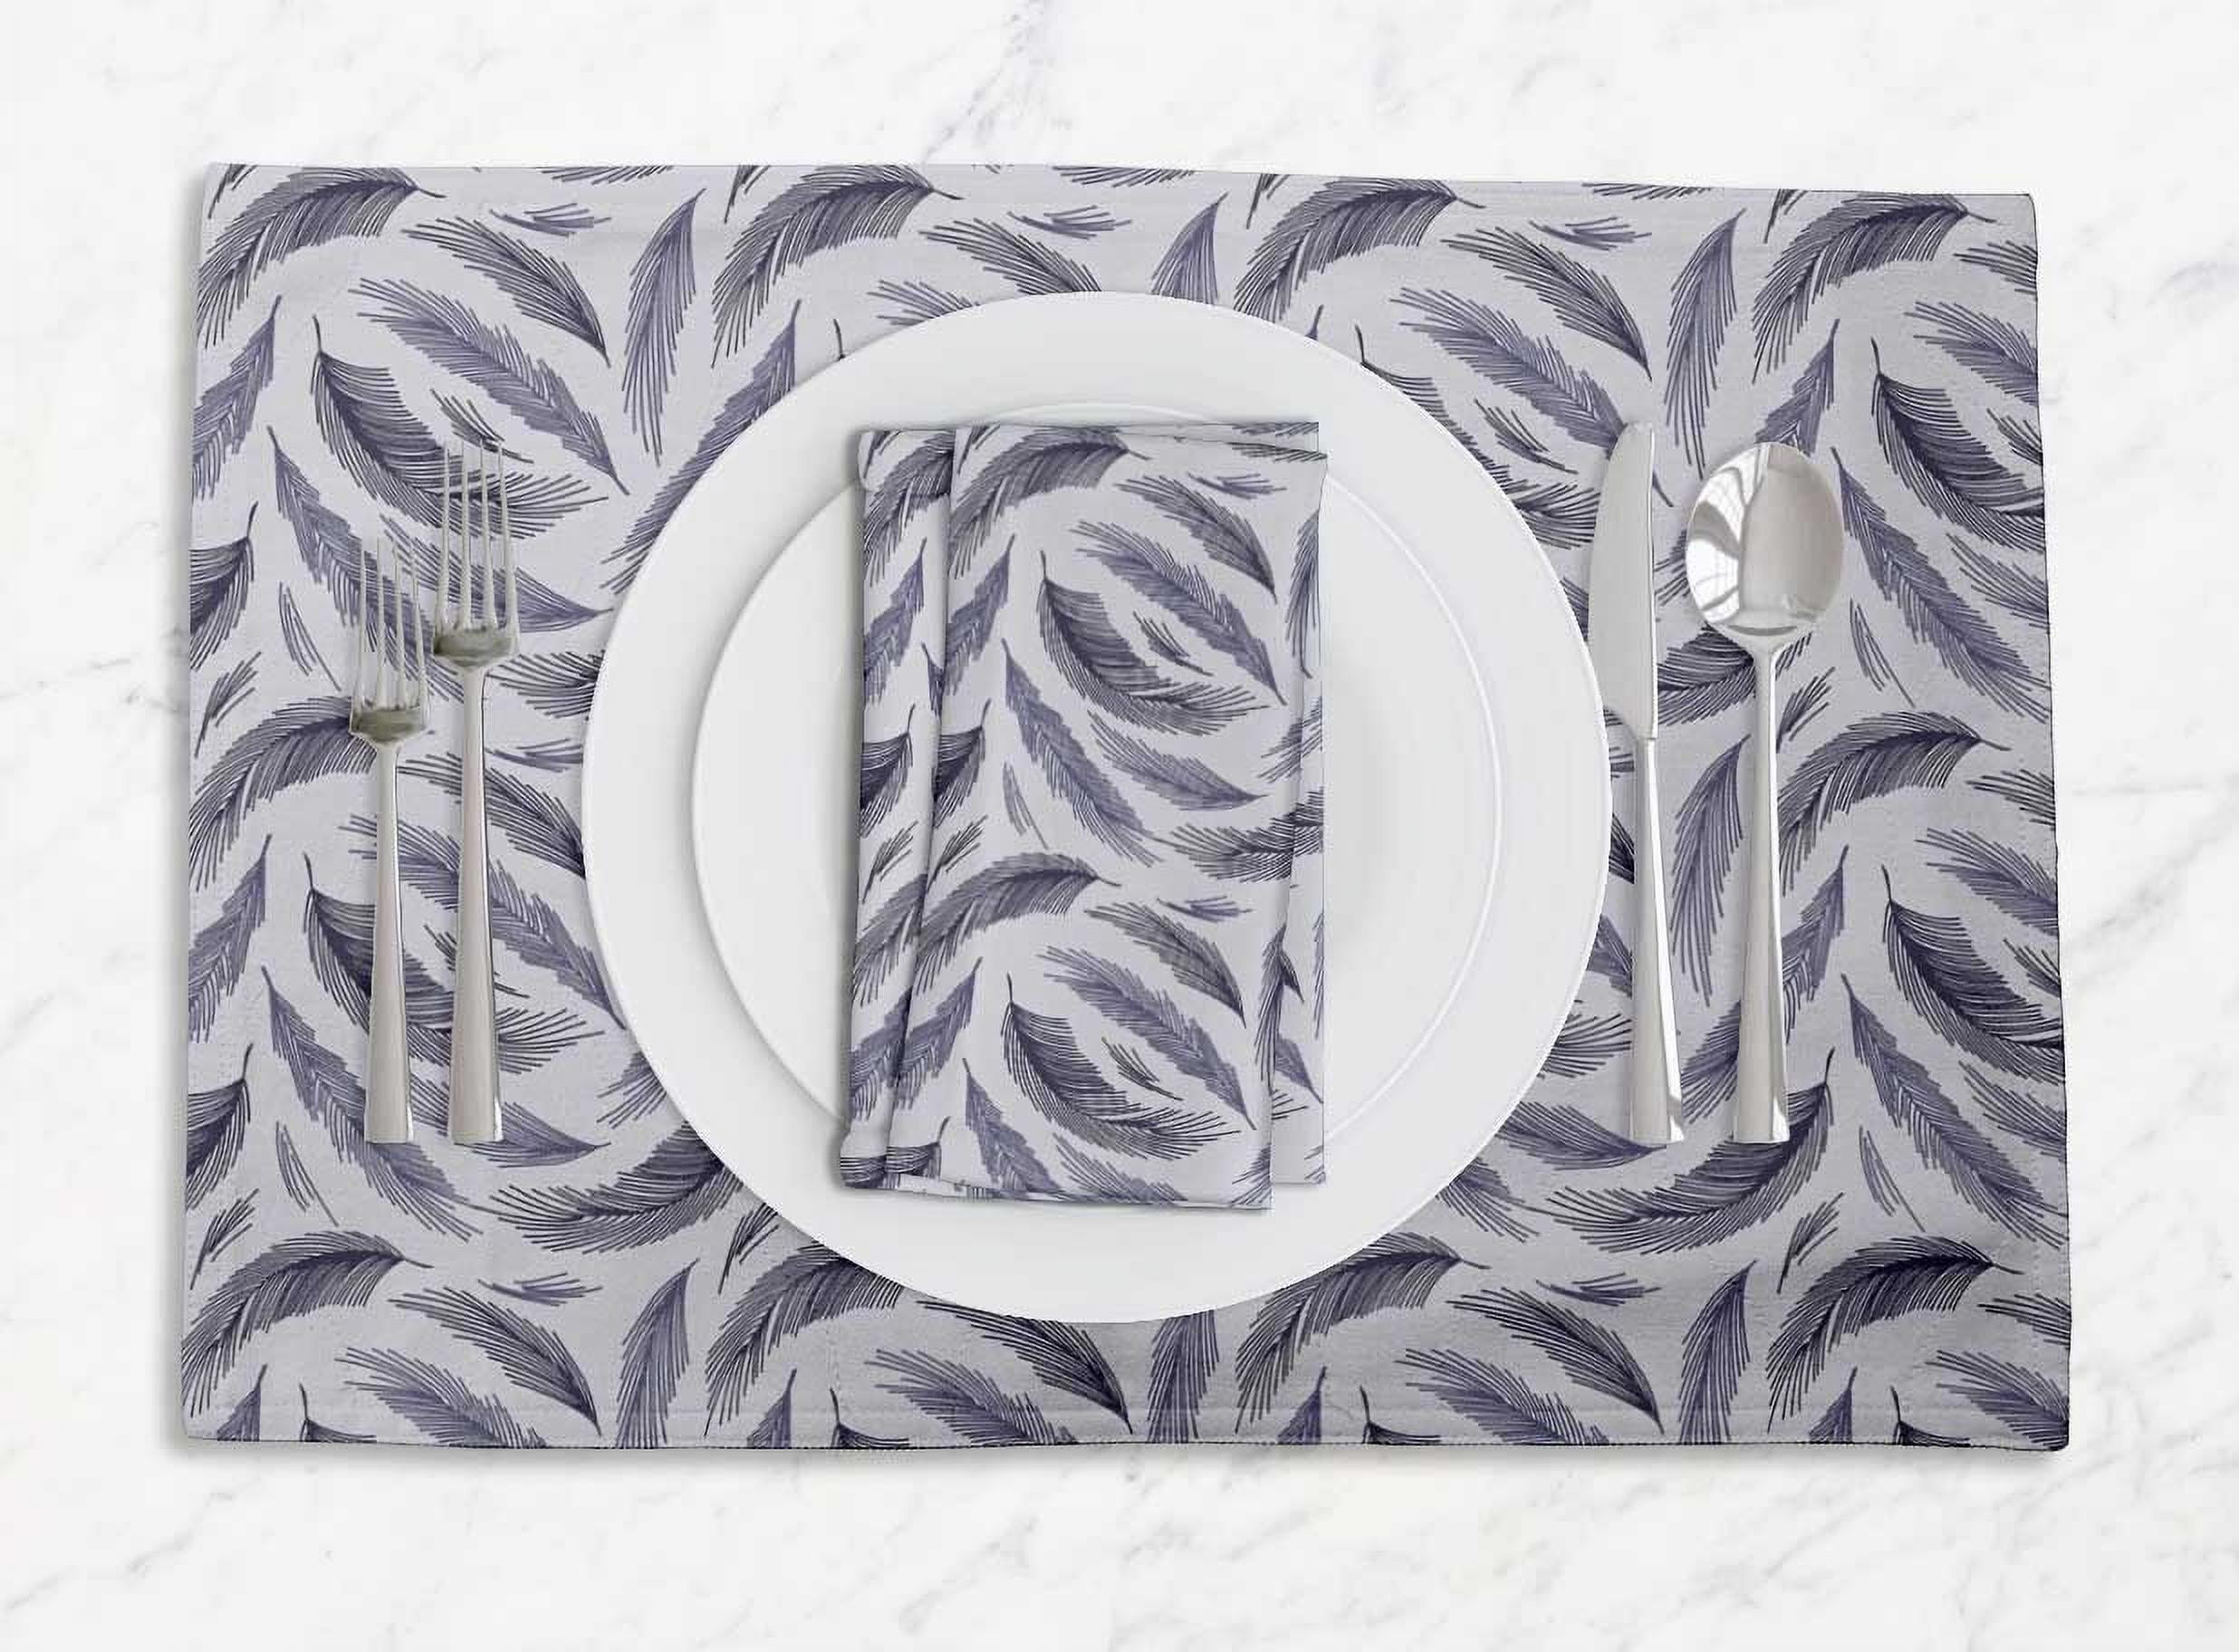 Details about   S4Sassy Damask Floral Washable Printed Dining Tablemats With Napkins Set-FL-35G 